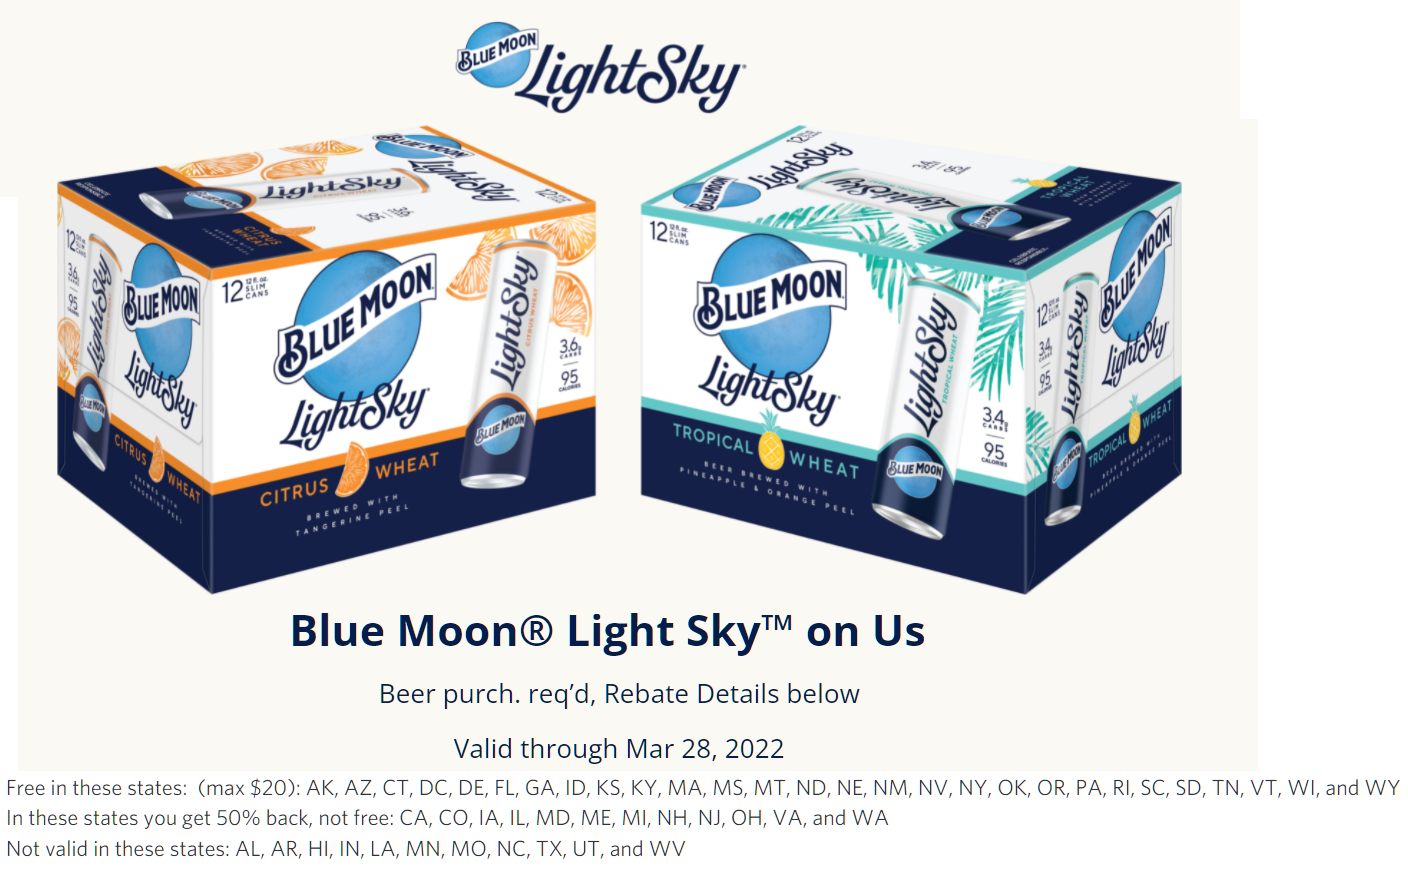 free-12-pack-of-blue-moon-light-sky-beer-any-variety-after-rebate